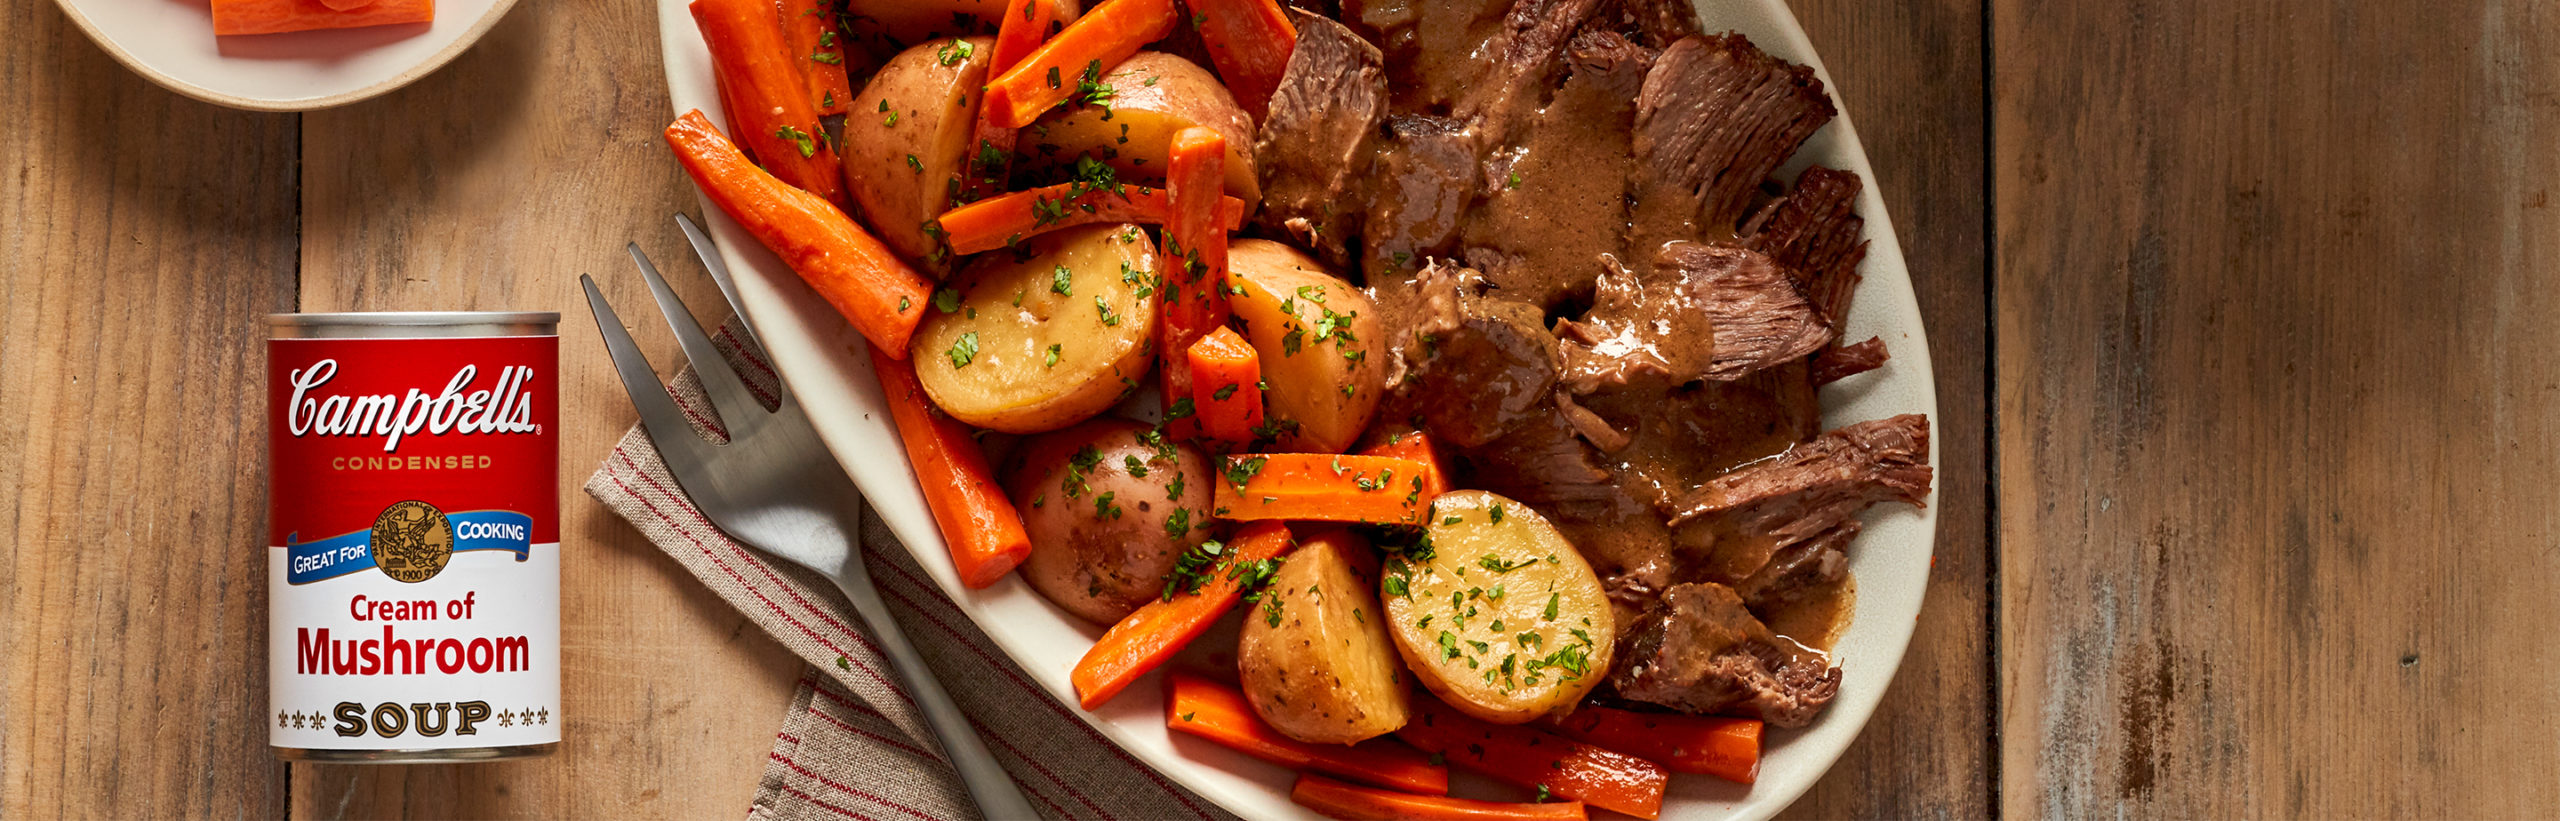 Easy Slow Cooker Savory Pot Roast Campbell Soup Company